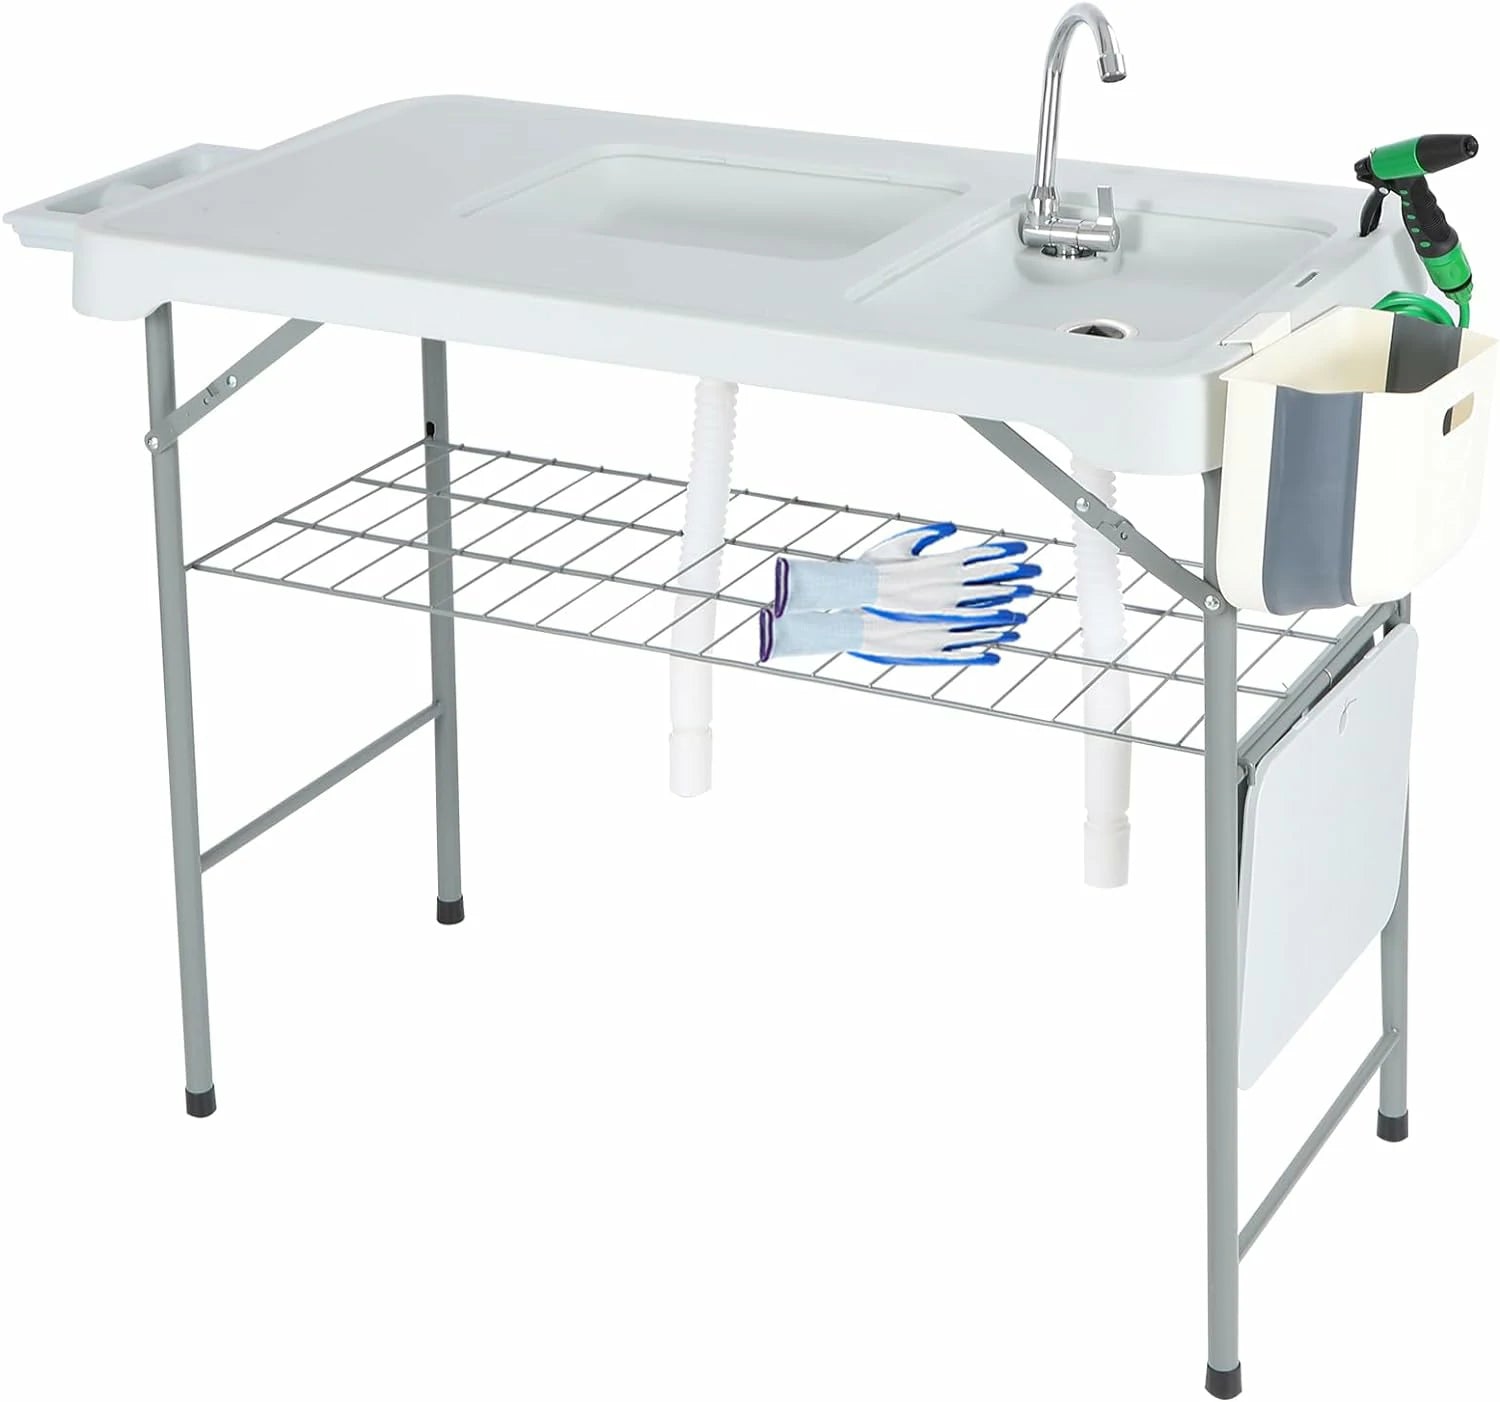 REDCAMP 39.4" Folding Fish Cleaning Table with Double Sink & Faucet